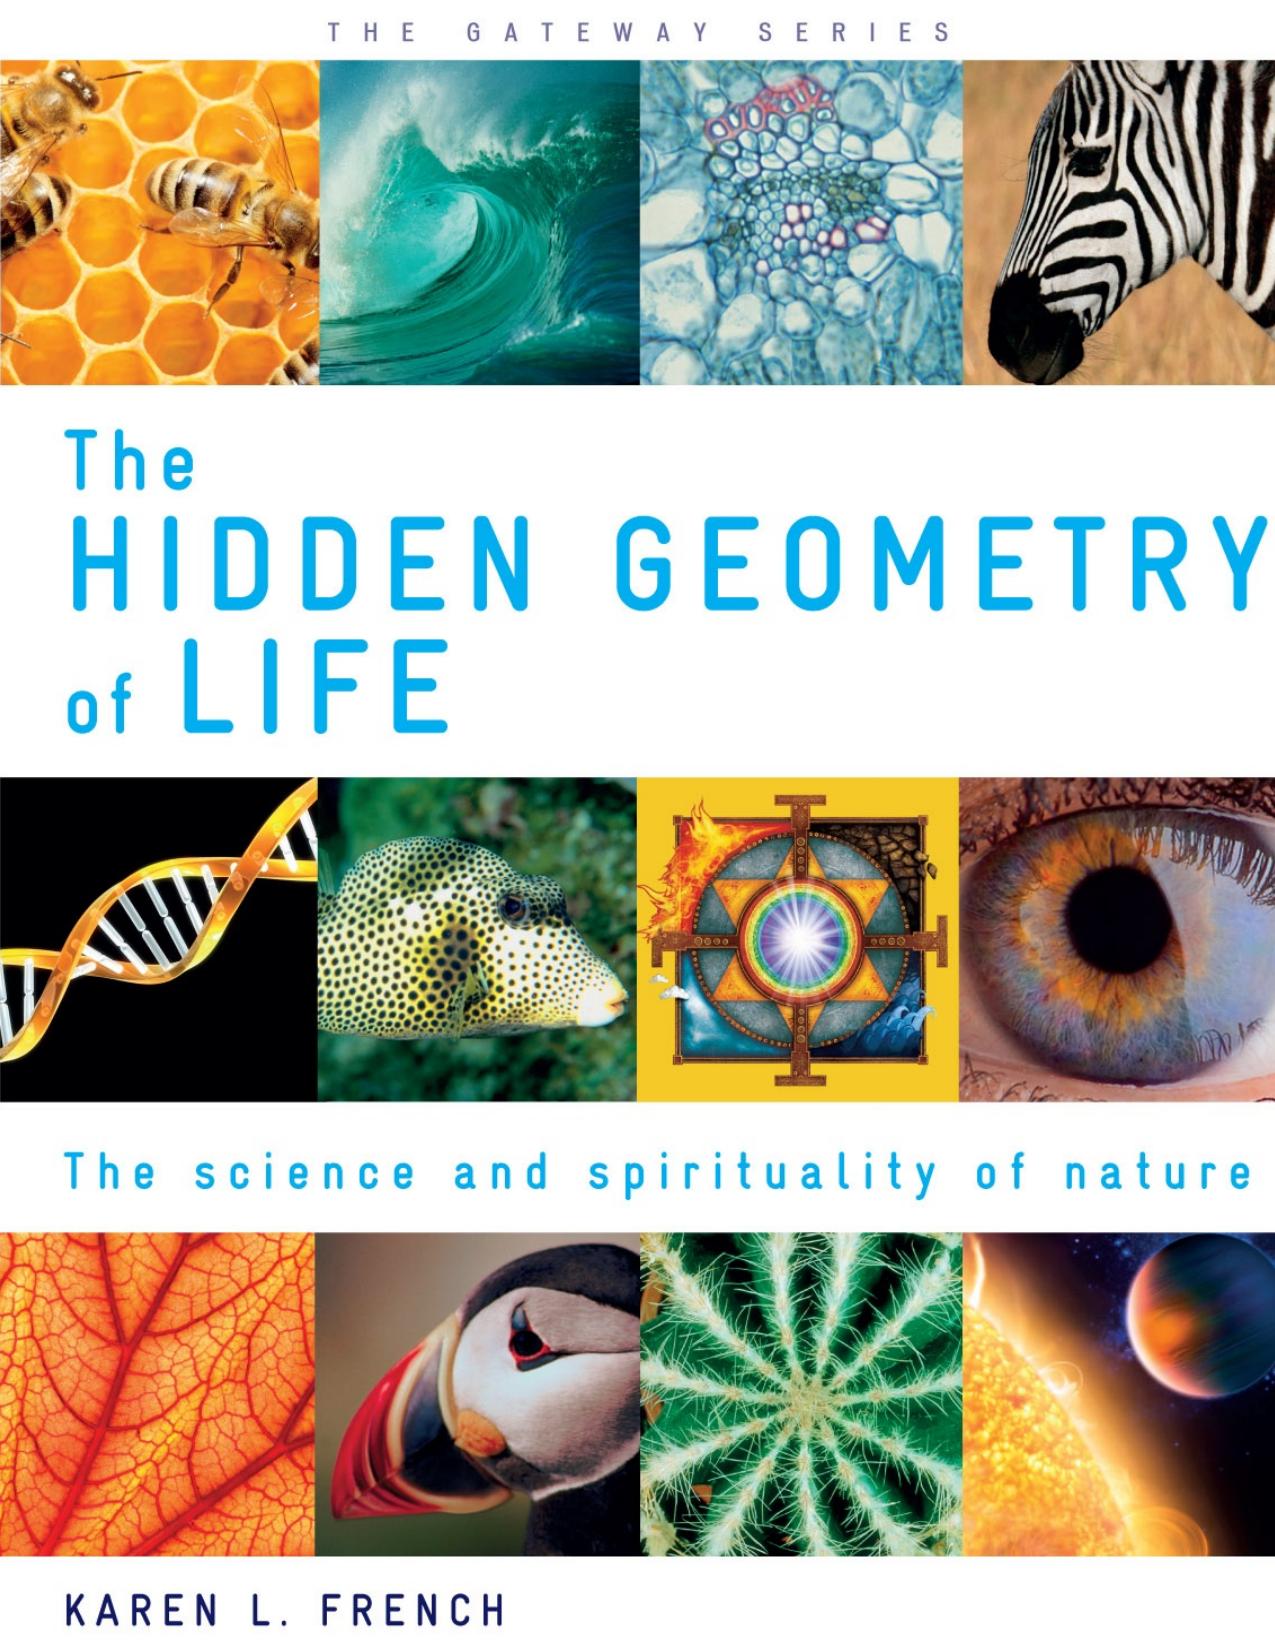 The Hidden Geometry of Life: The Science and Spirituality of Nature